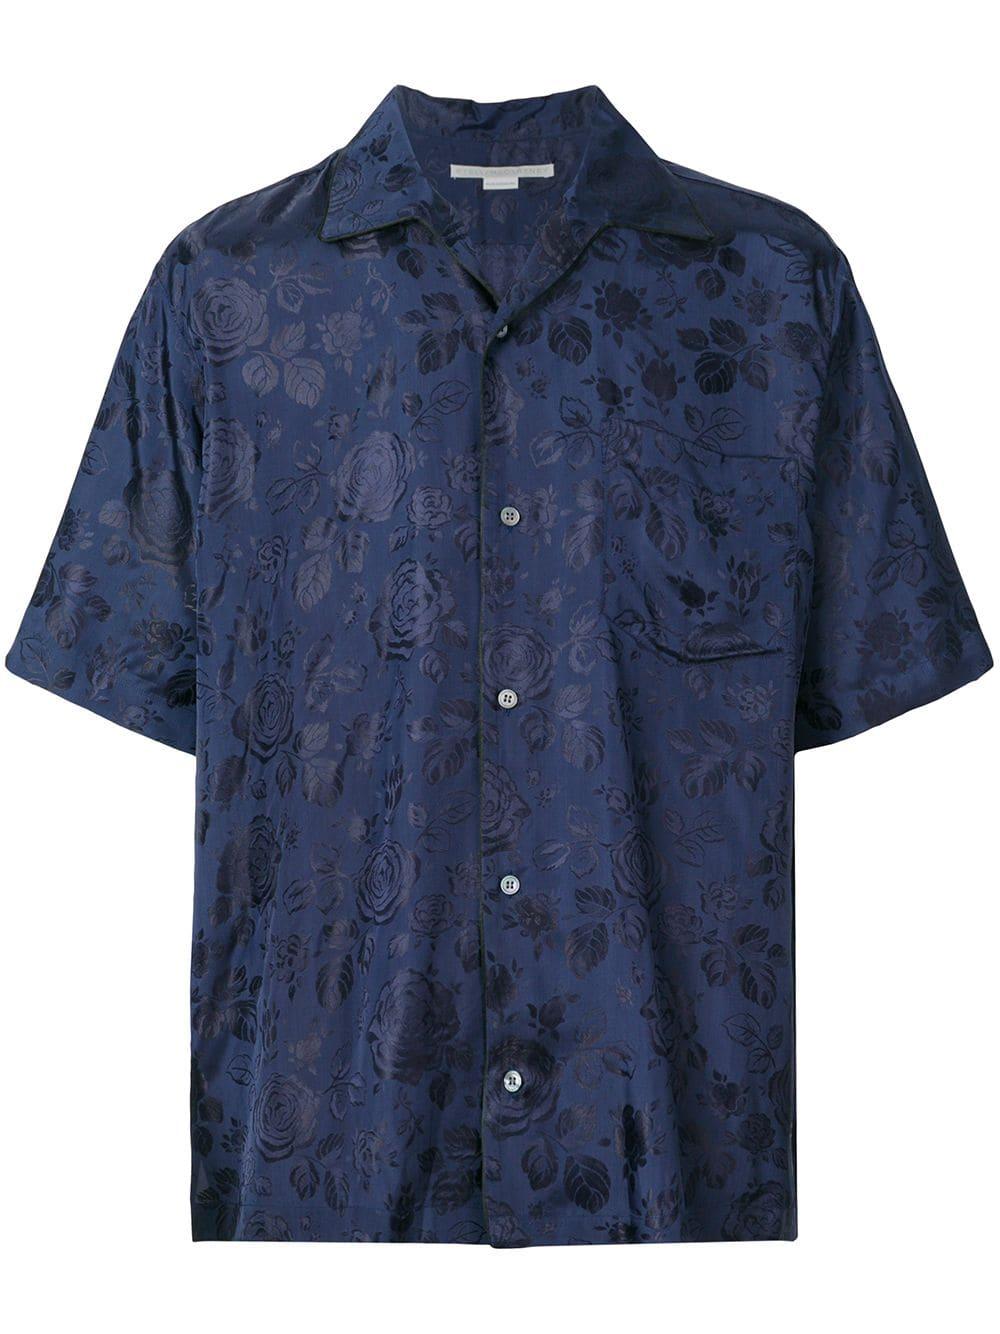 Stella McCartney Synthetic Textured Button Shirt in Blue for Men - Lyst